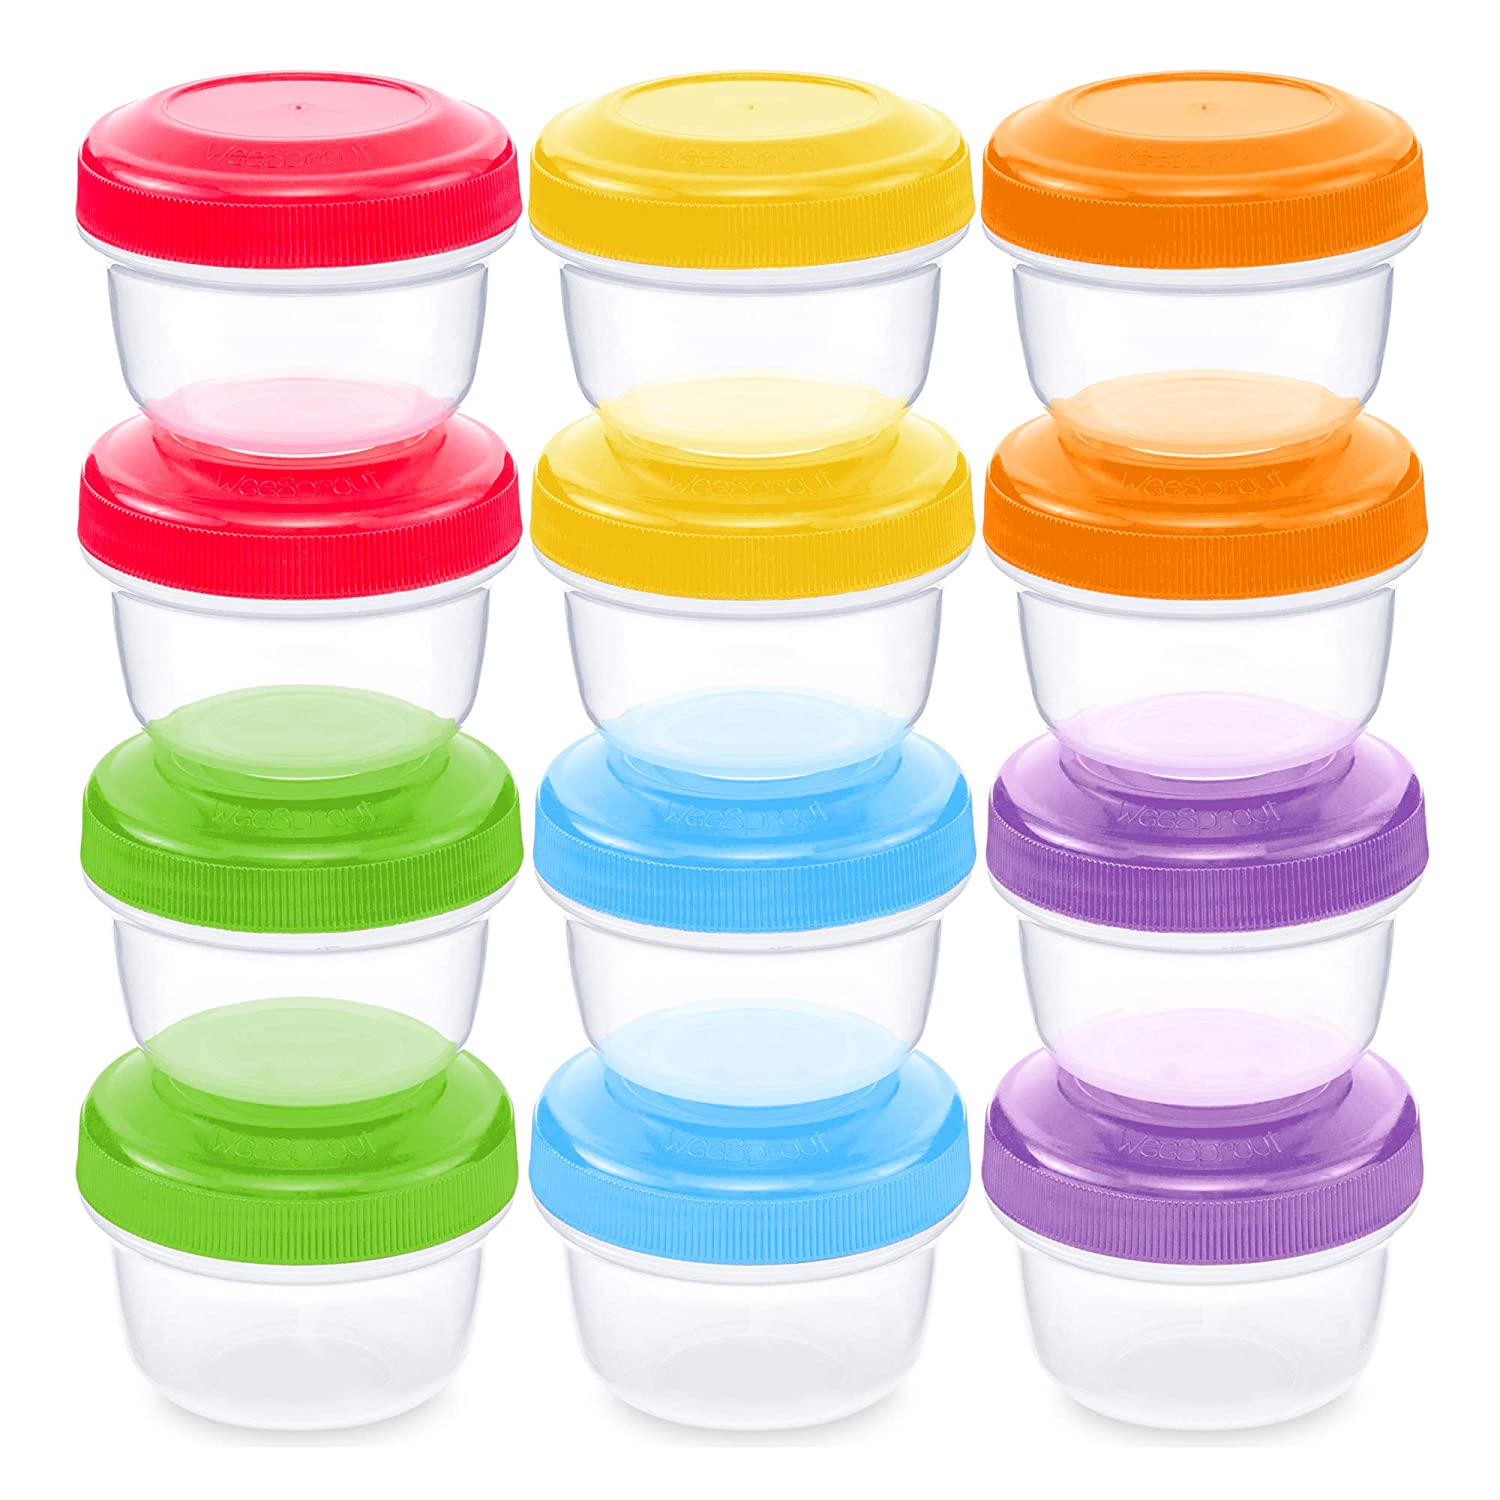 EP_ Cute Weaning Baby Food Silicone Freezer Tray Storage Container BPA Free Dazz 